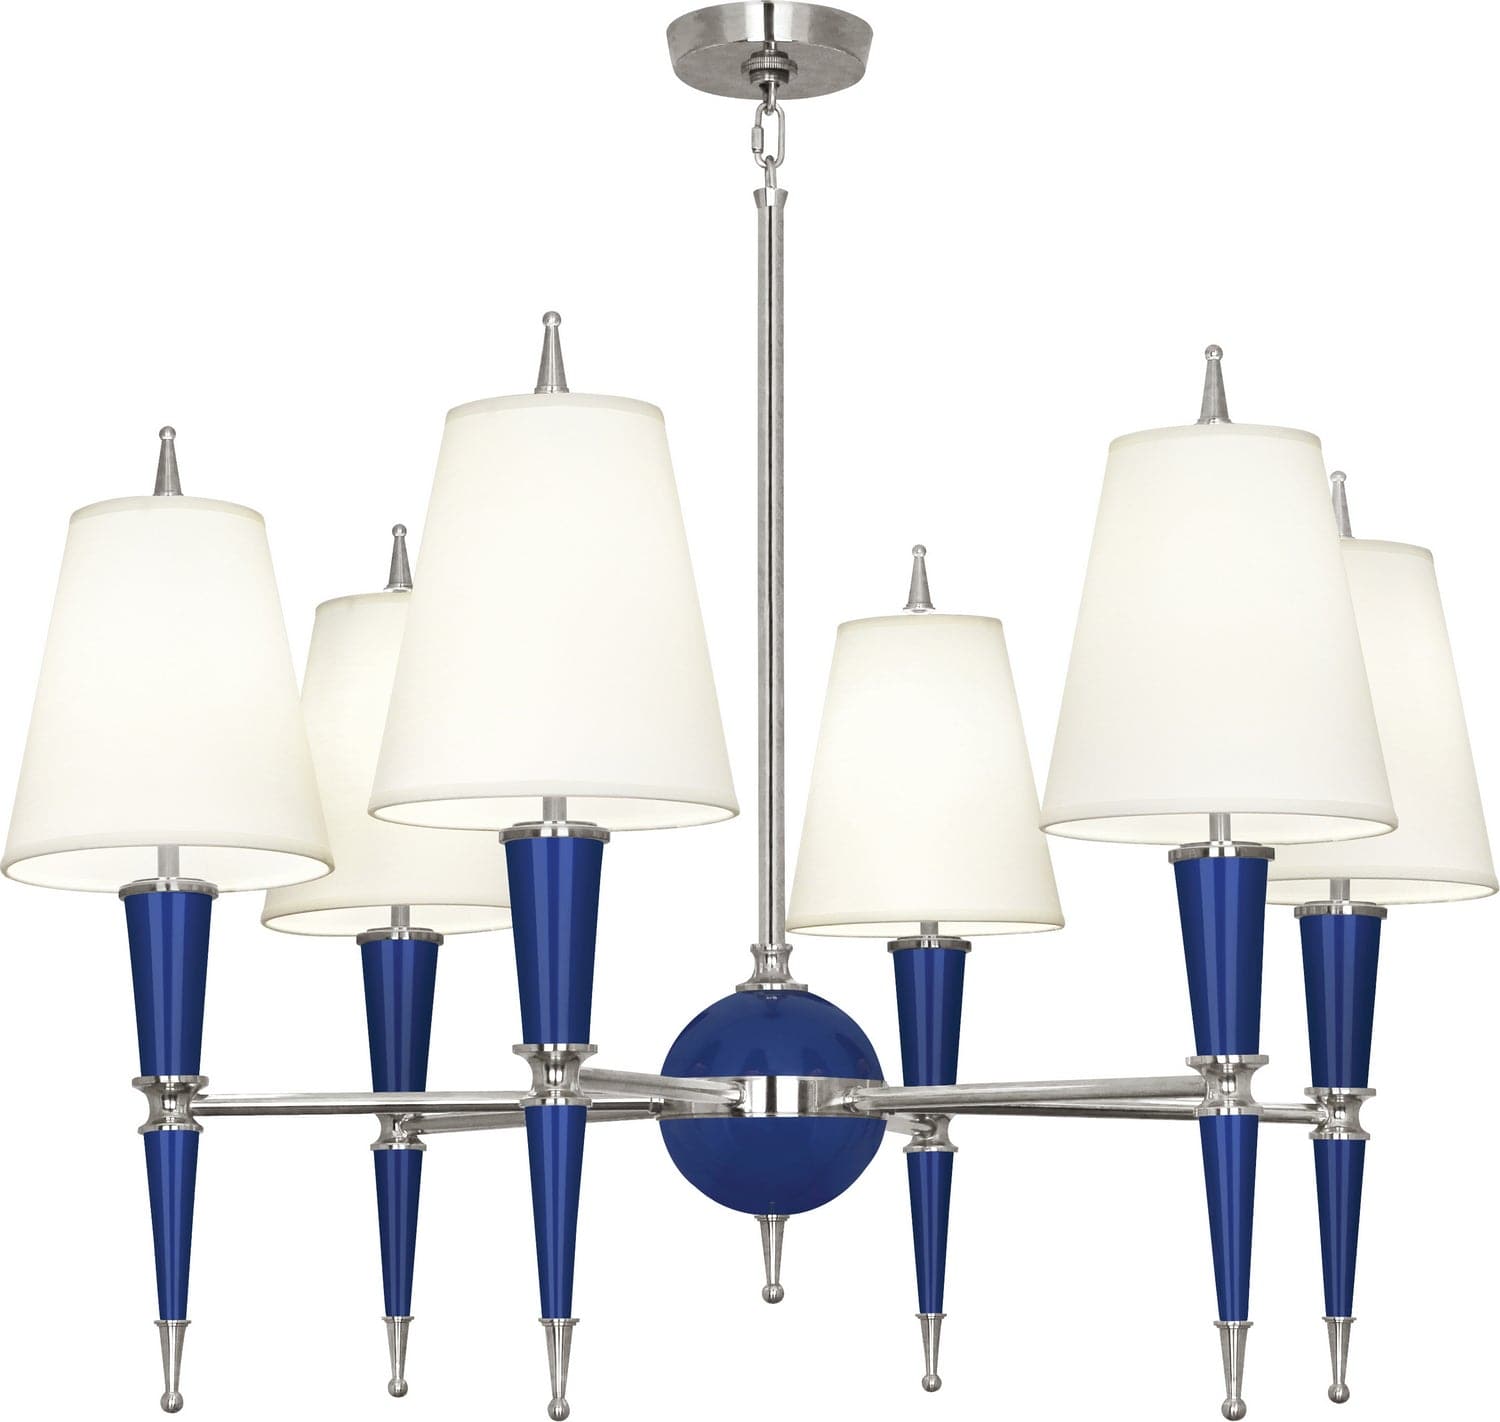 Robert Abbey - C604X - Six Light Chandelier - Jonathan Adler Versailles - Navy Lacquered Paint w/Polished Nickel